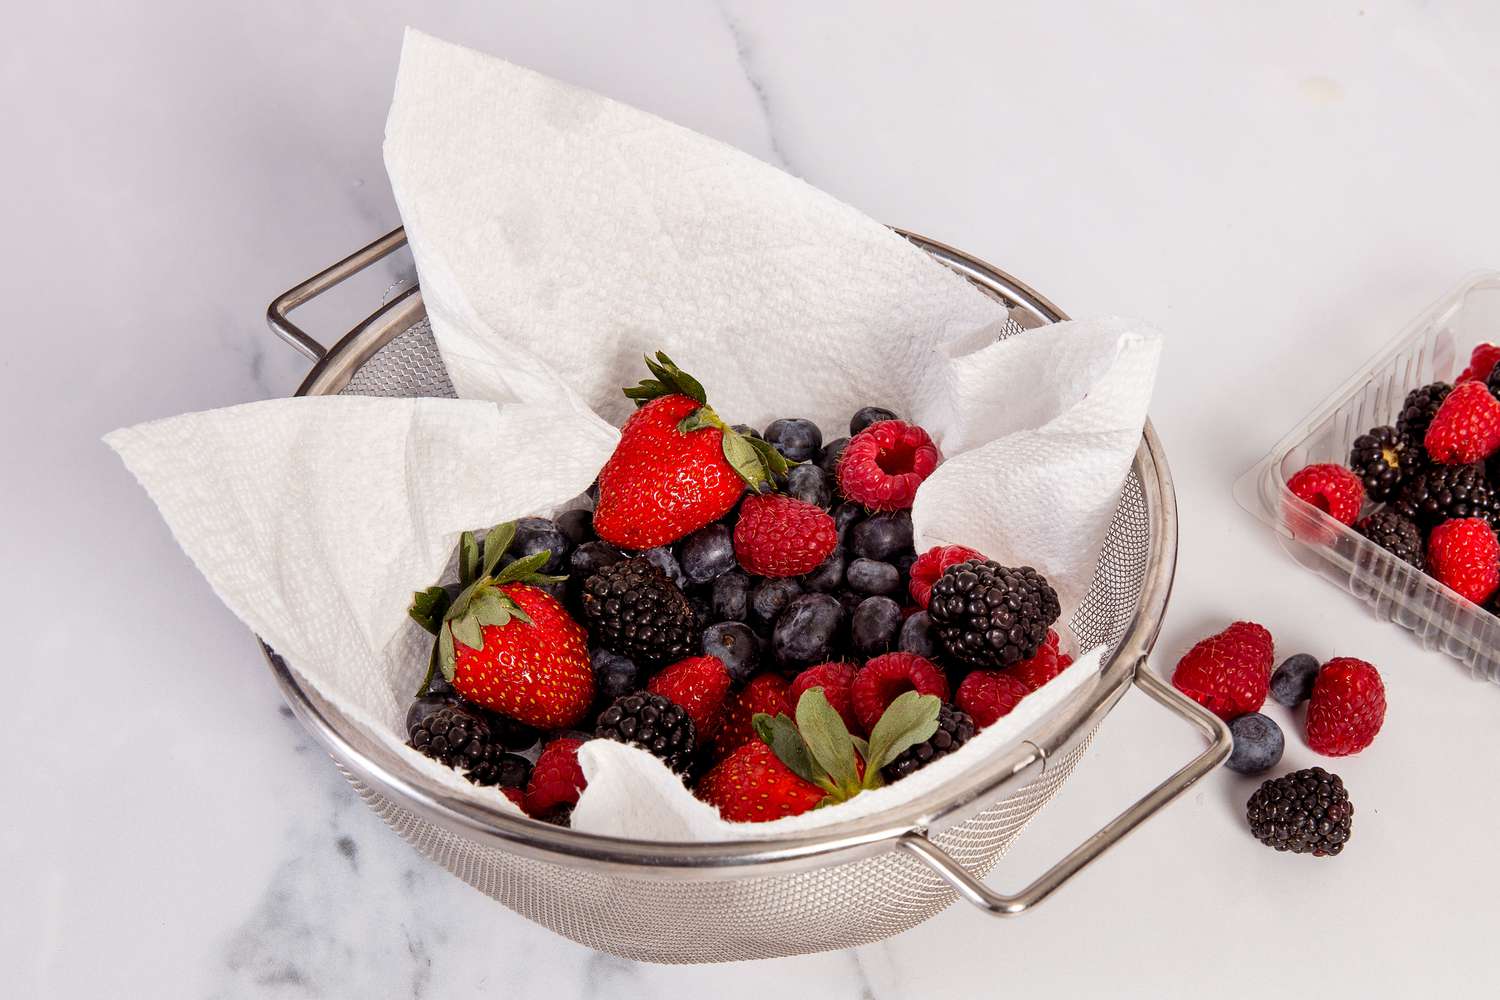 How To Store Berries After Washing